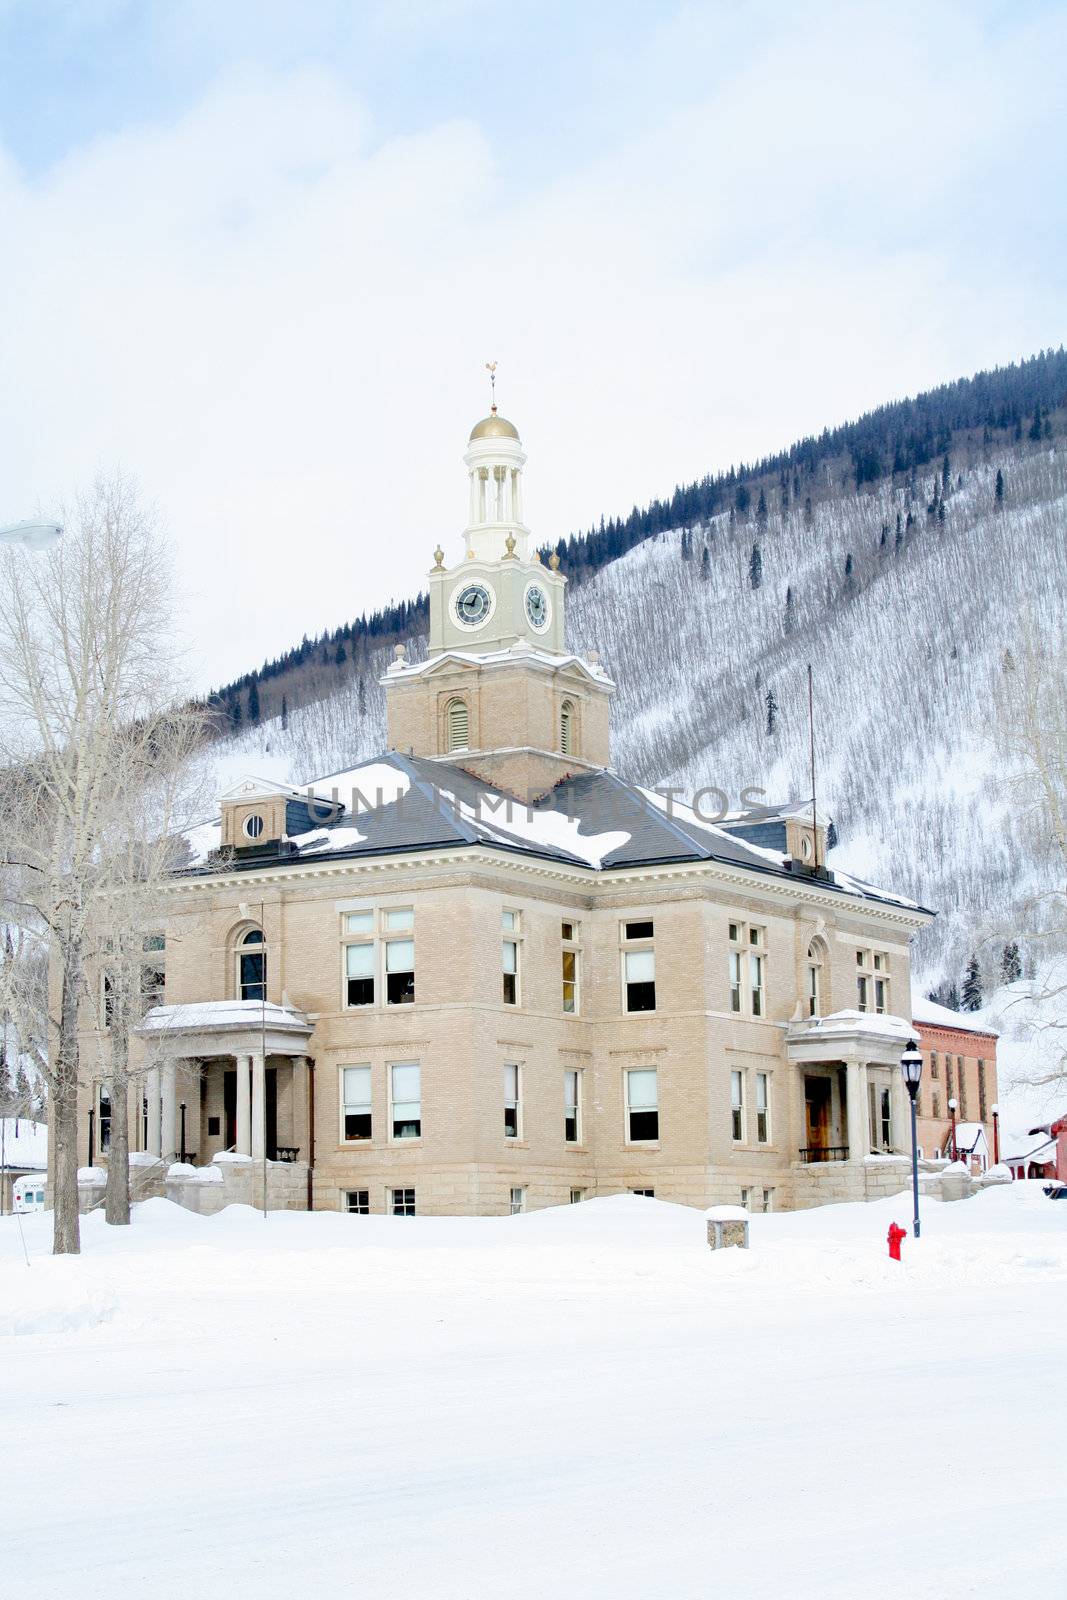 Old town hall in mountains with lots of snow